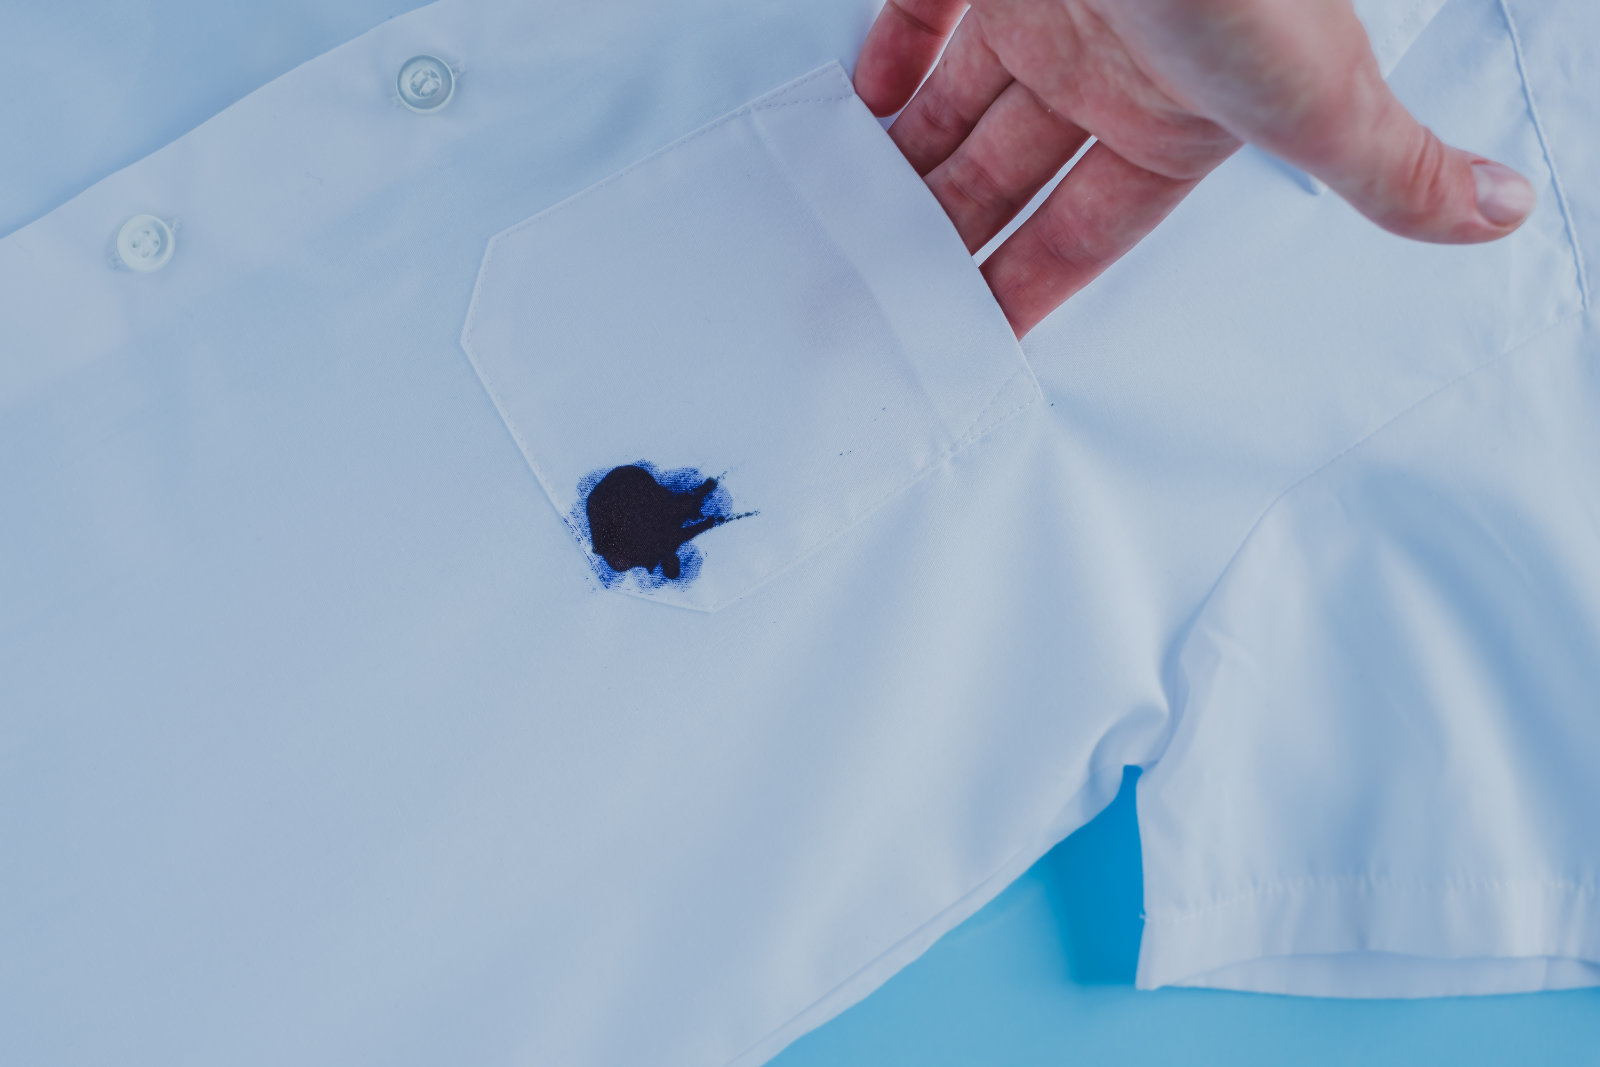 How To Get Ink Out Of Clothes